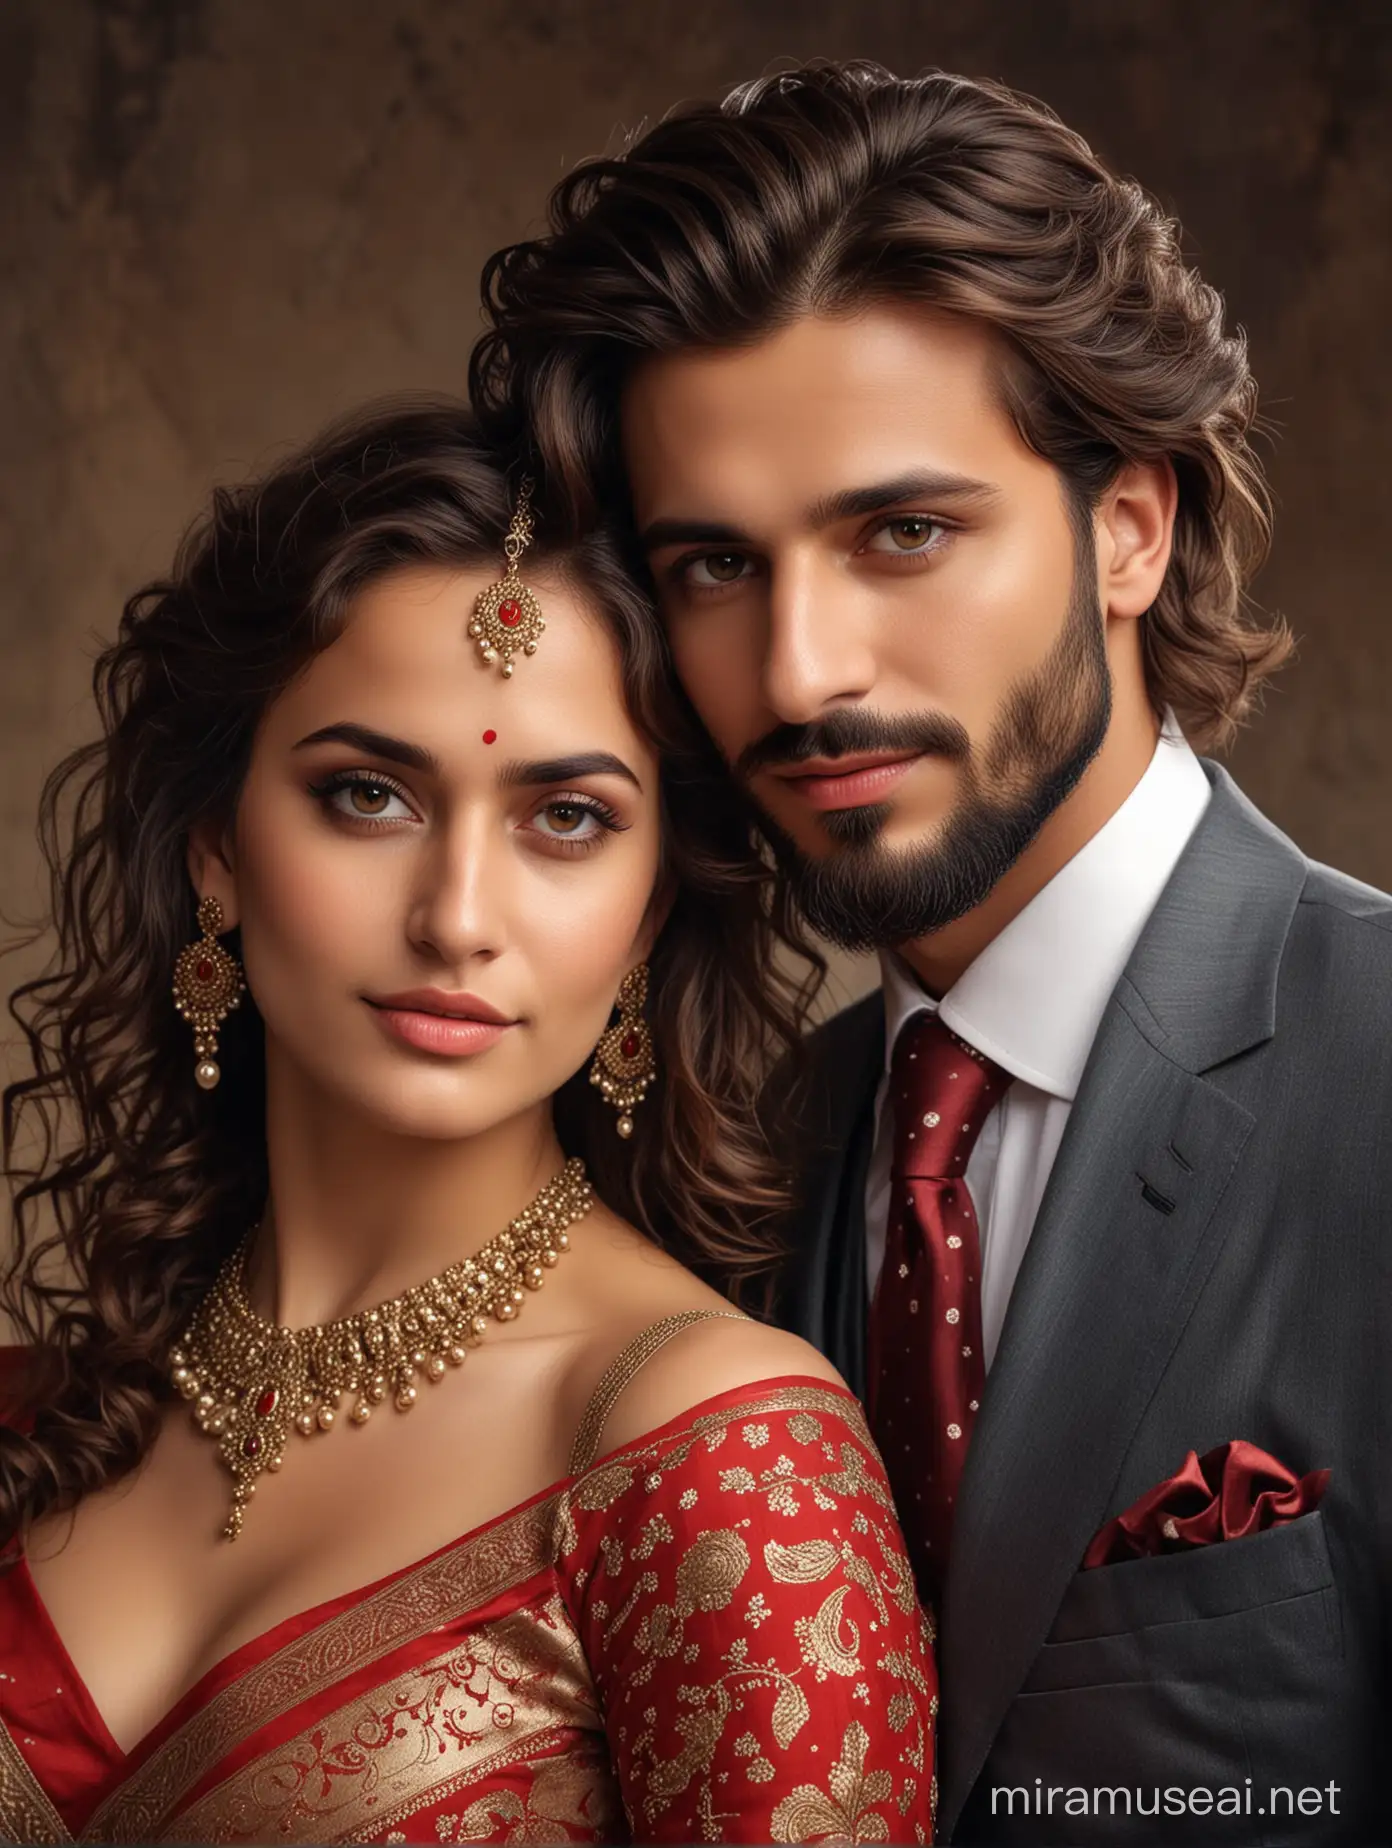 full portrait photo of most beautiful european couple as most beautiful indian couple,  most beautiful cute girl in elegant saree, wide black eyes, full face, full red dot on forehead, girl has long curly hairs, full red dot,  hair falling on breasts, full makeup,  full jewelry, hair ornaments,  low cut back, , girl embracing man and resting forehead on chest of man, man with stylish beard and perfect proper hair cut, suit, photo realistic, 4k.